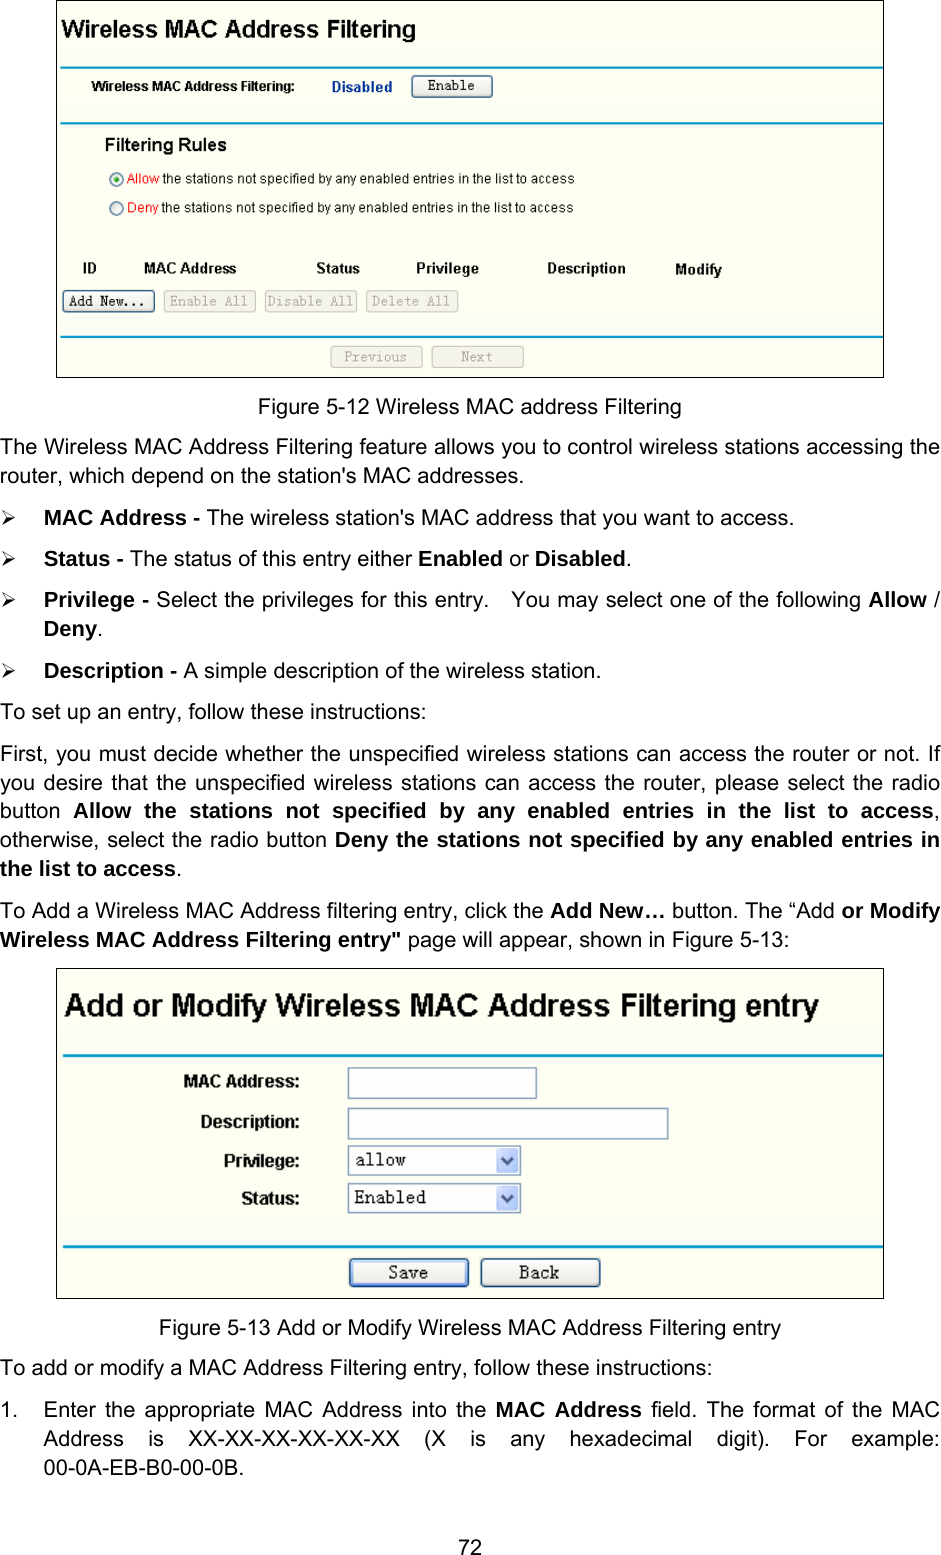  72  Figure 5-12 Wireless MAC address Filtering The Wireless MAC Address Filtering feature allows you to control wireless stations accessing the router, which depend on the station&apos;s MAC addresses.   ¾ MAC Address - The wireless station&apos;s MAC address that you want to access.   ¾ Status - The status of this entry either Enabled or Disabled. ¾ Privilege - Select the privileges for this entry.    You may select one of the following Allow / Deny.   ¾ Description - A simple description of the wireless station.   To set up an entry, follow these instructions:   First, you must decide whether the unspecified wireless stations can access the router or not. If you desire that the unspecified wireless stations can access the router, please select the radio button  Allow the stations not specified by any enabled entries in the list to access, otherwise, select the radio button Deny the stations not specified by any enabled entries in the list to access. To Add a Wireless MAC Address filtering entry, click the Add New… button. The “Add or Modify Wireless MAC Address Filtering entry&quot; page will appear, shown in Figure 5-13:  Figure 5-13 Add or Modify Wireless MAC Address Filtering entry To add or modify a MAC Address Filtering entry, follow these instructions: 1.  Enter the appropriate MAC Address into the MAC Address field. The format of the MAC Address is XX-XX-XX-XX-XX-XX (X is any hexadecimal digit). For example: 00-0A-EB-B0-00-0B.  